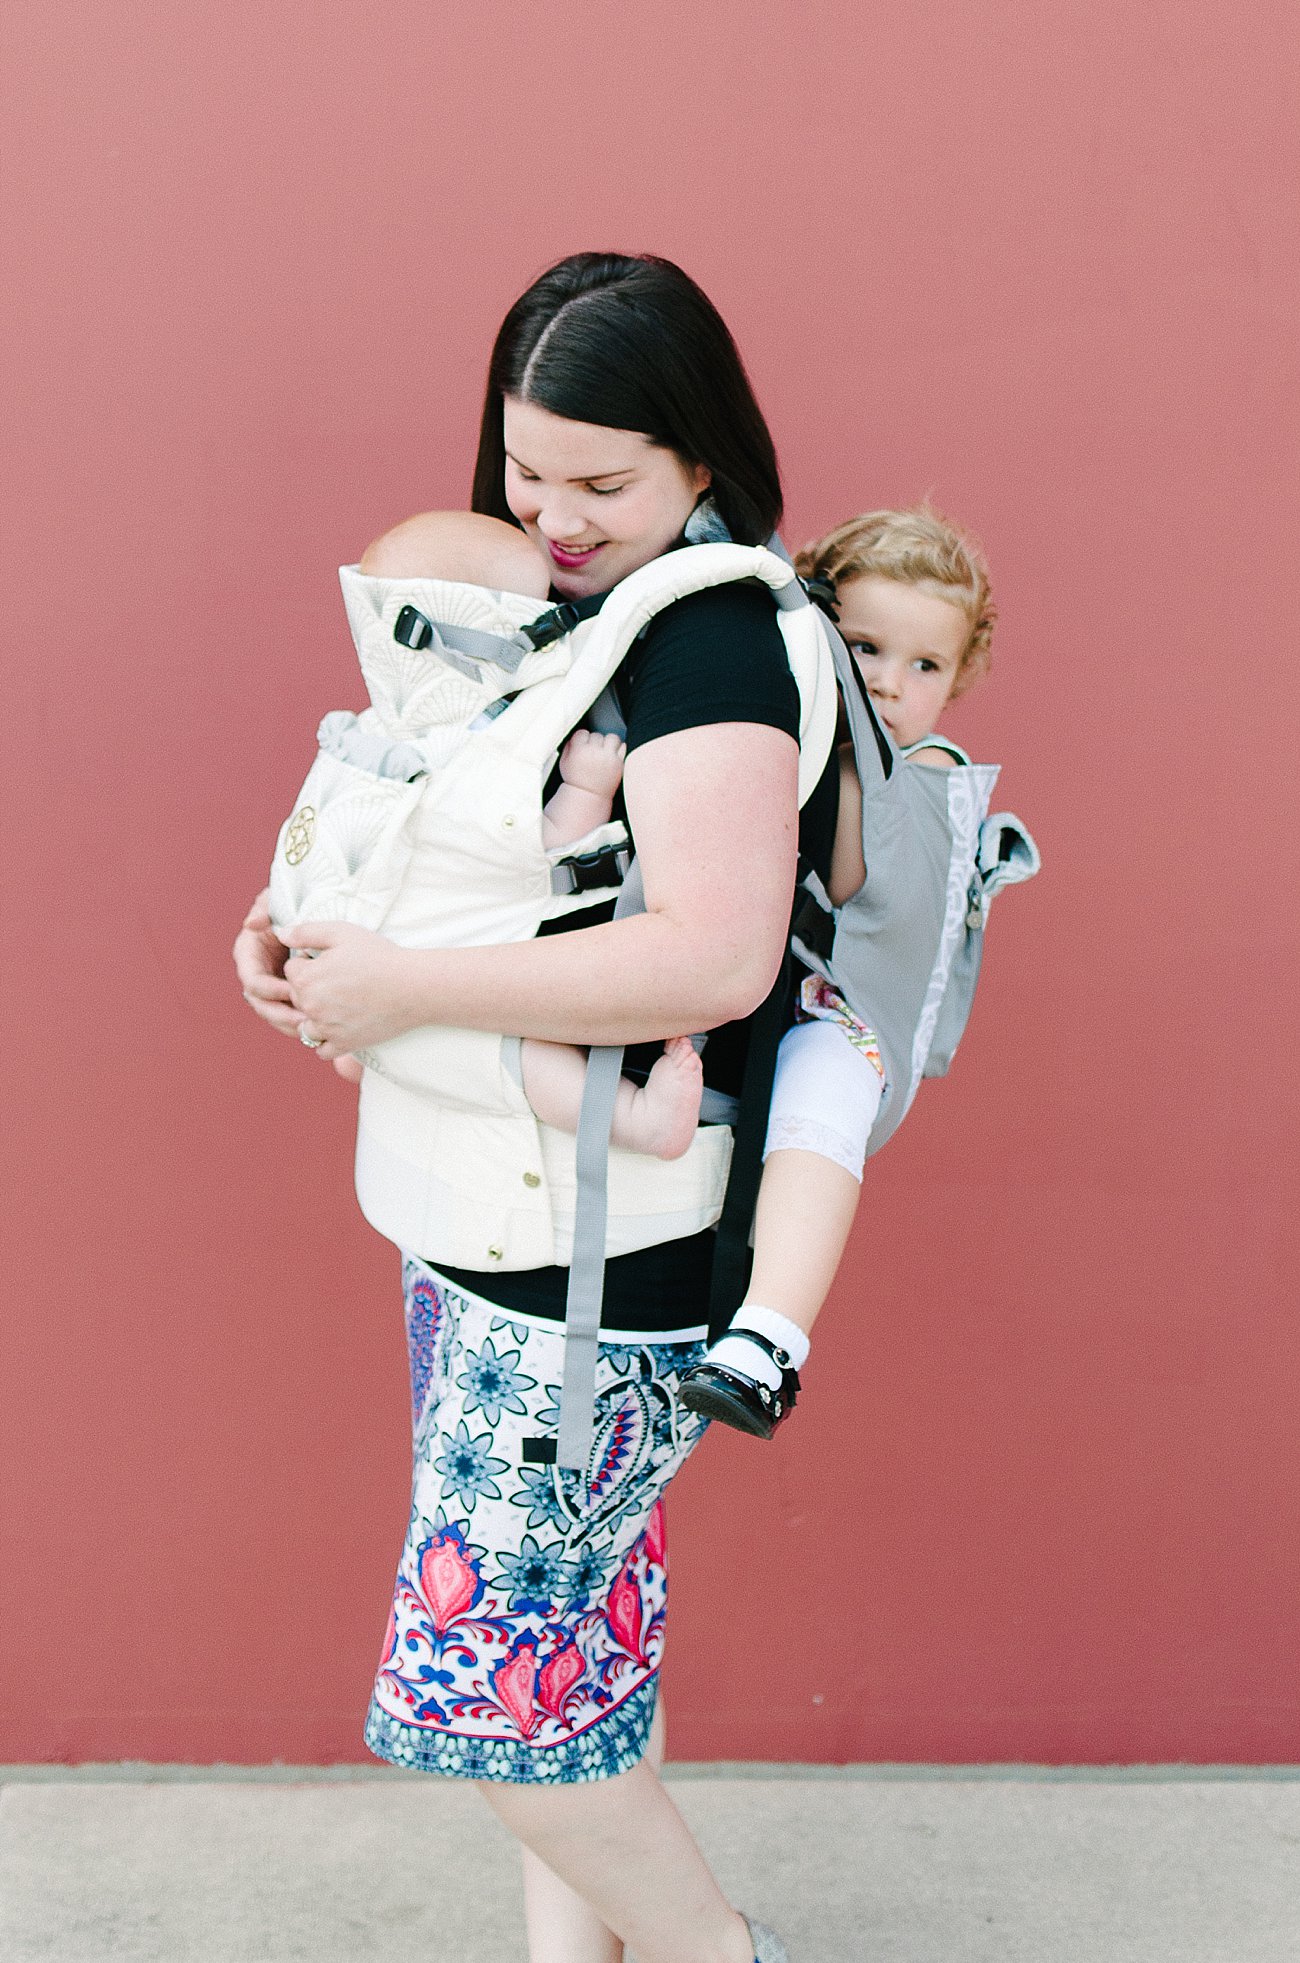 with Lillebaby Complete & CarryOn Baby Carriers #babywearing #tandemwearing #toddlerwearing (6)